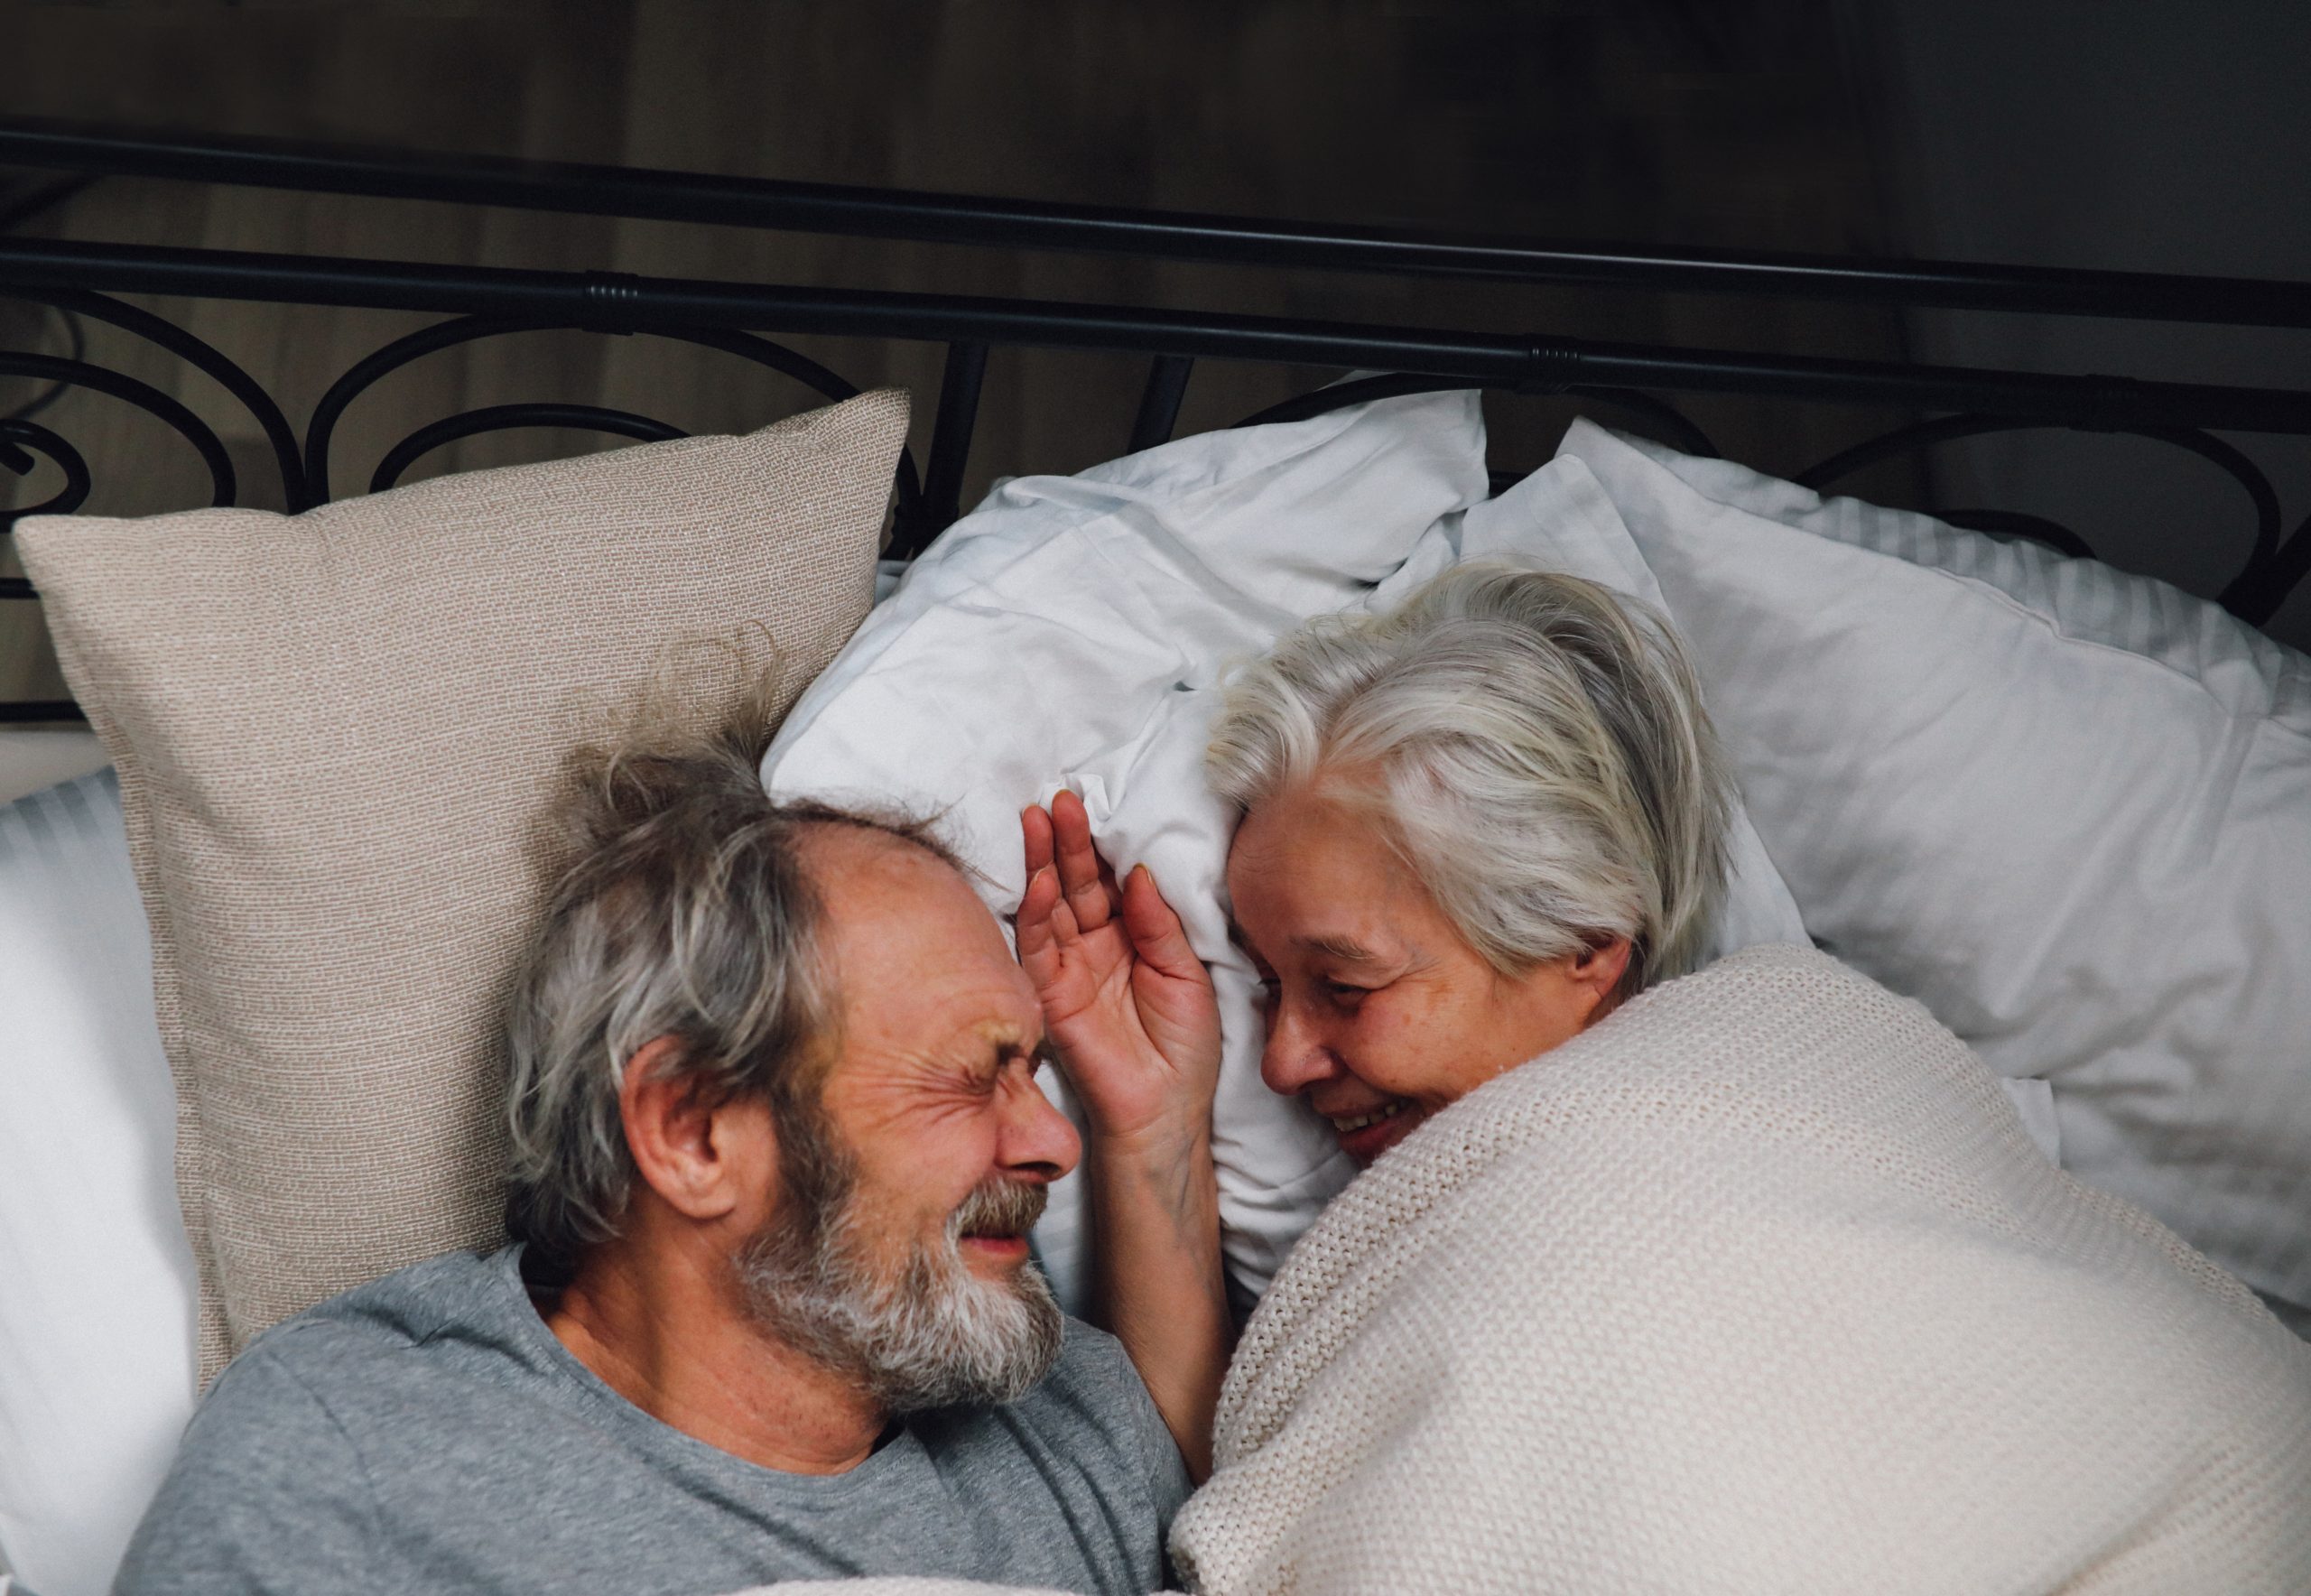 Photograph of older couple cuddling in bed